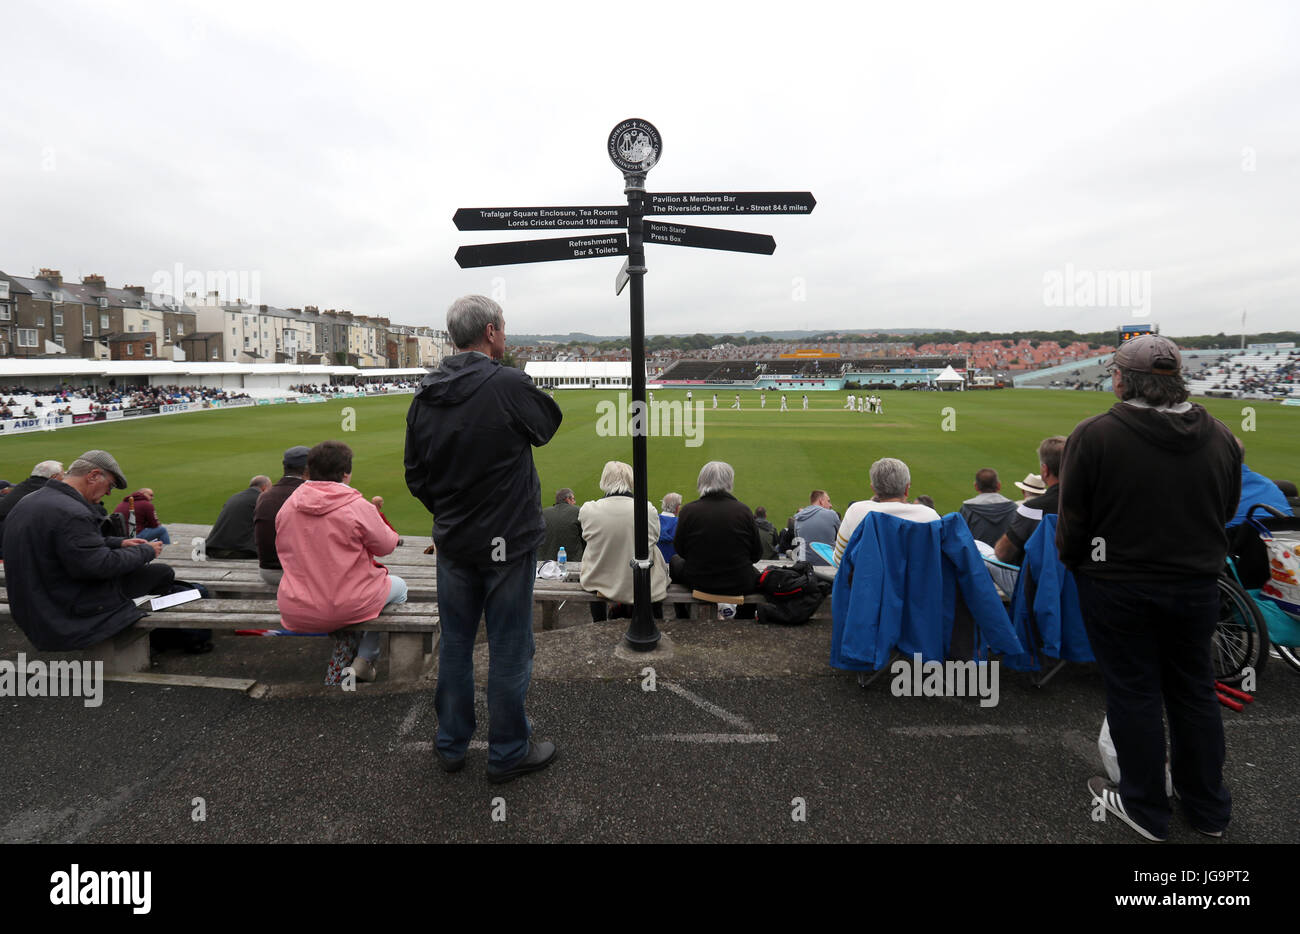 Fans watch the action by a signpost displaying how near the major county grounds are during the Specsavers County Championship, Division One match at the North Marine Road Ground, Scarborough. Stock Photo